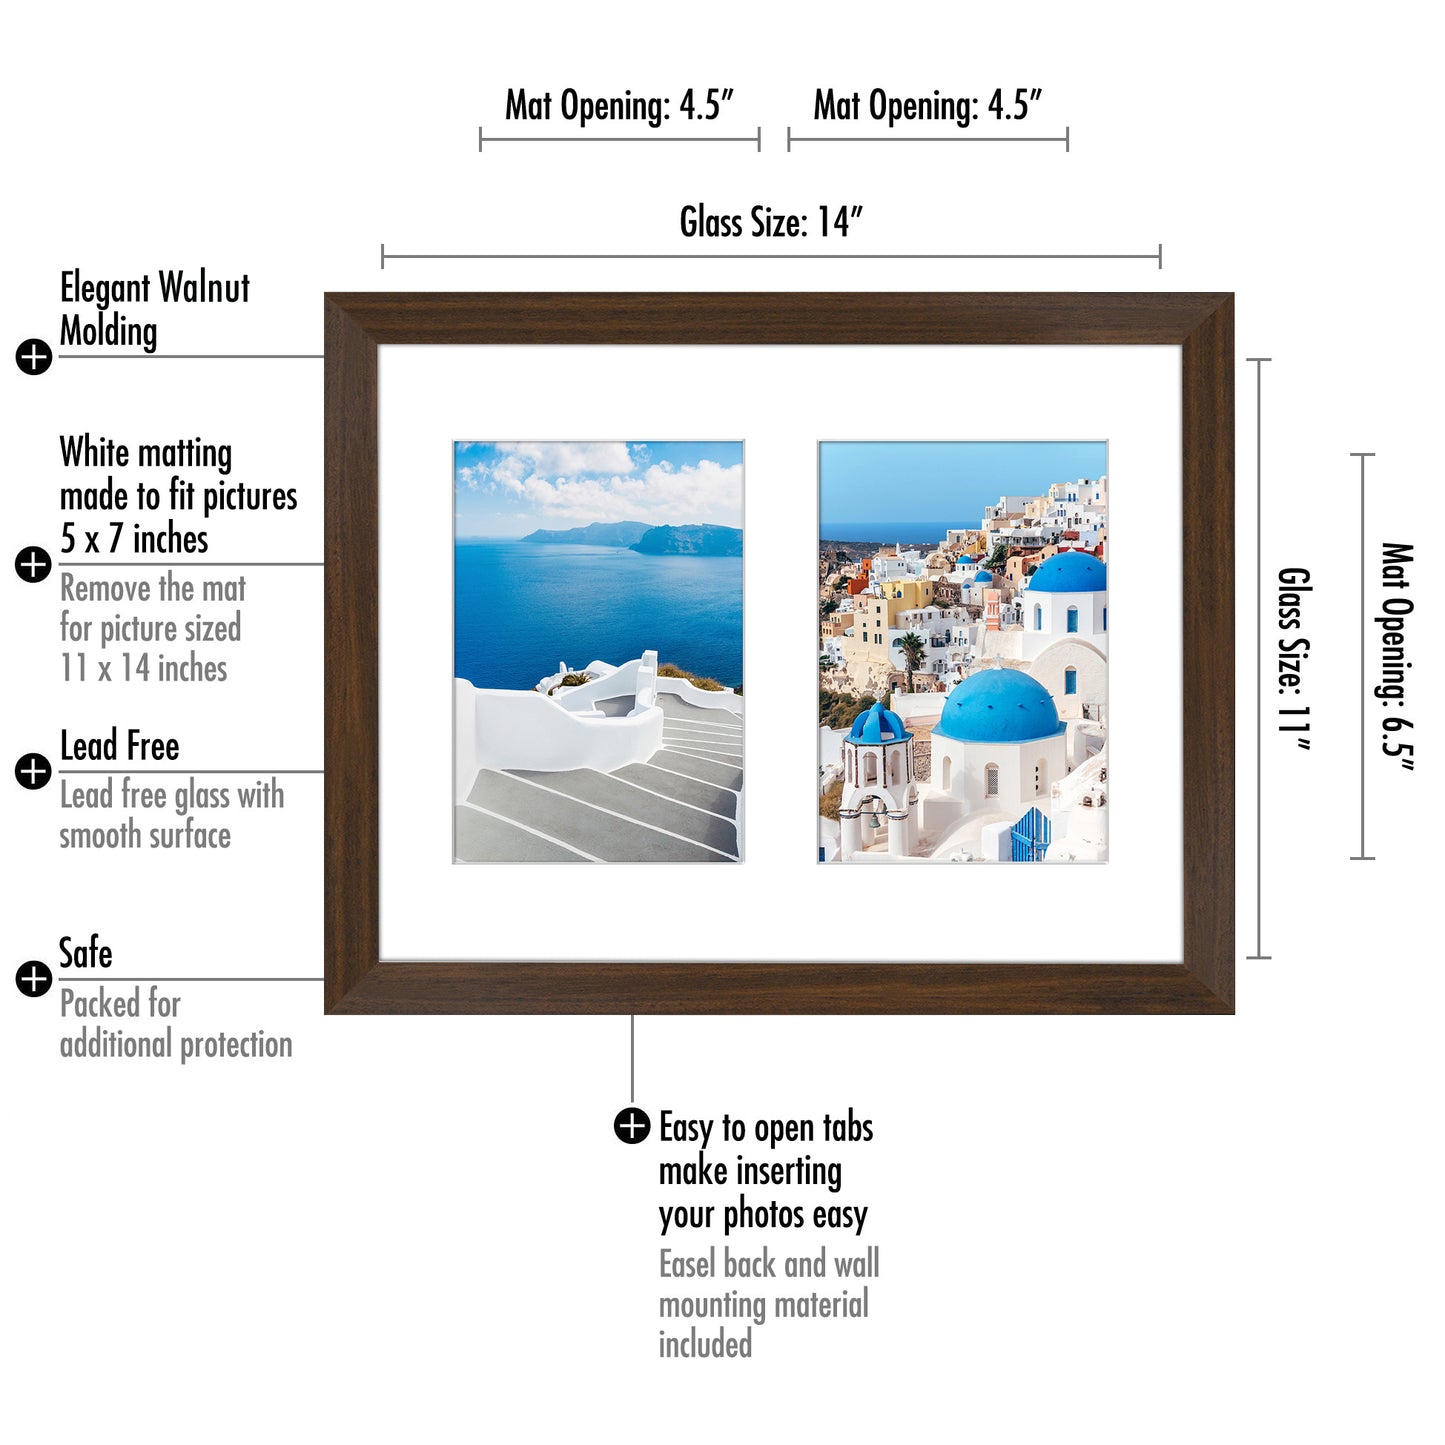 Double Collage Picture Frame for 5x7 | Multi-use Display | Choose Color